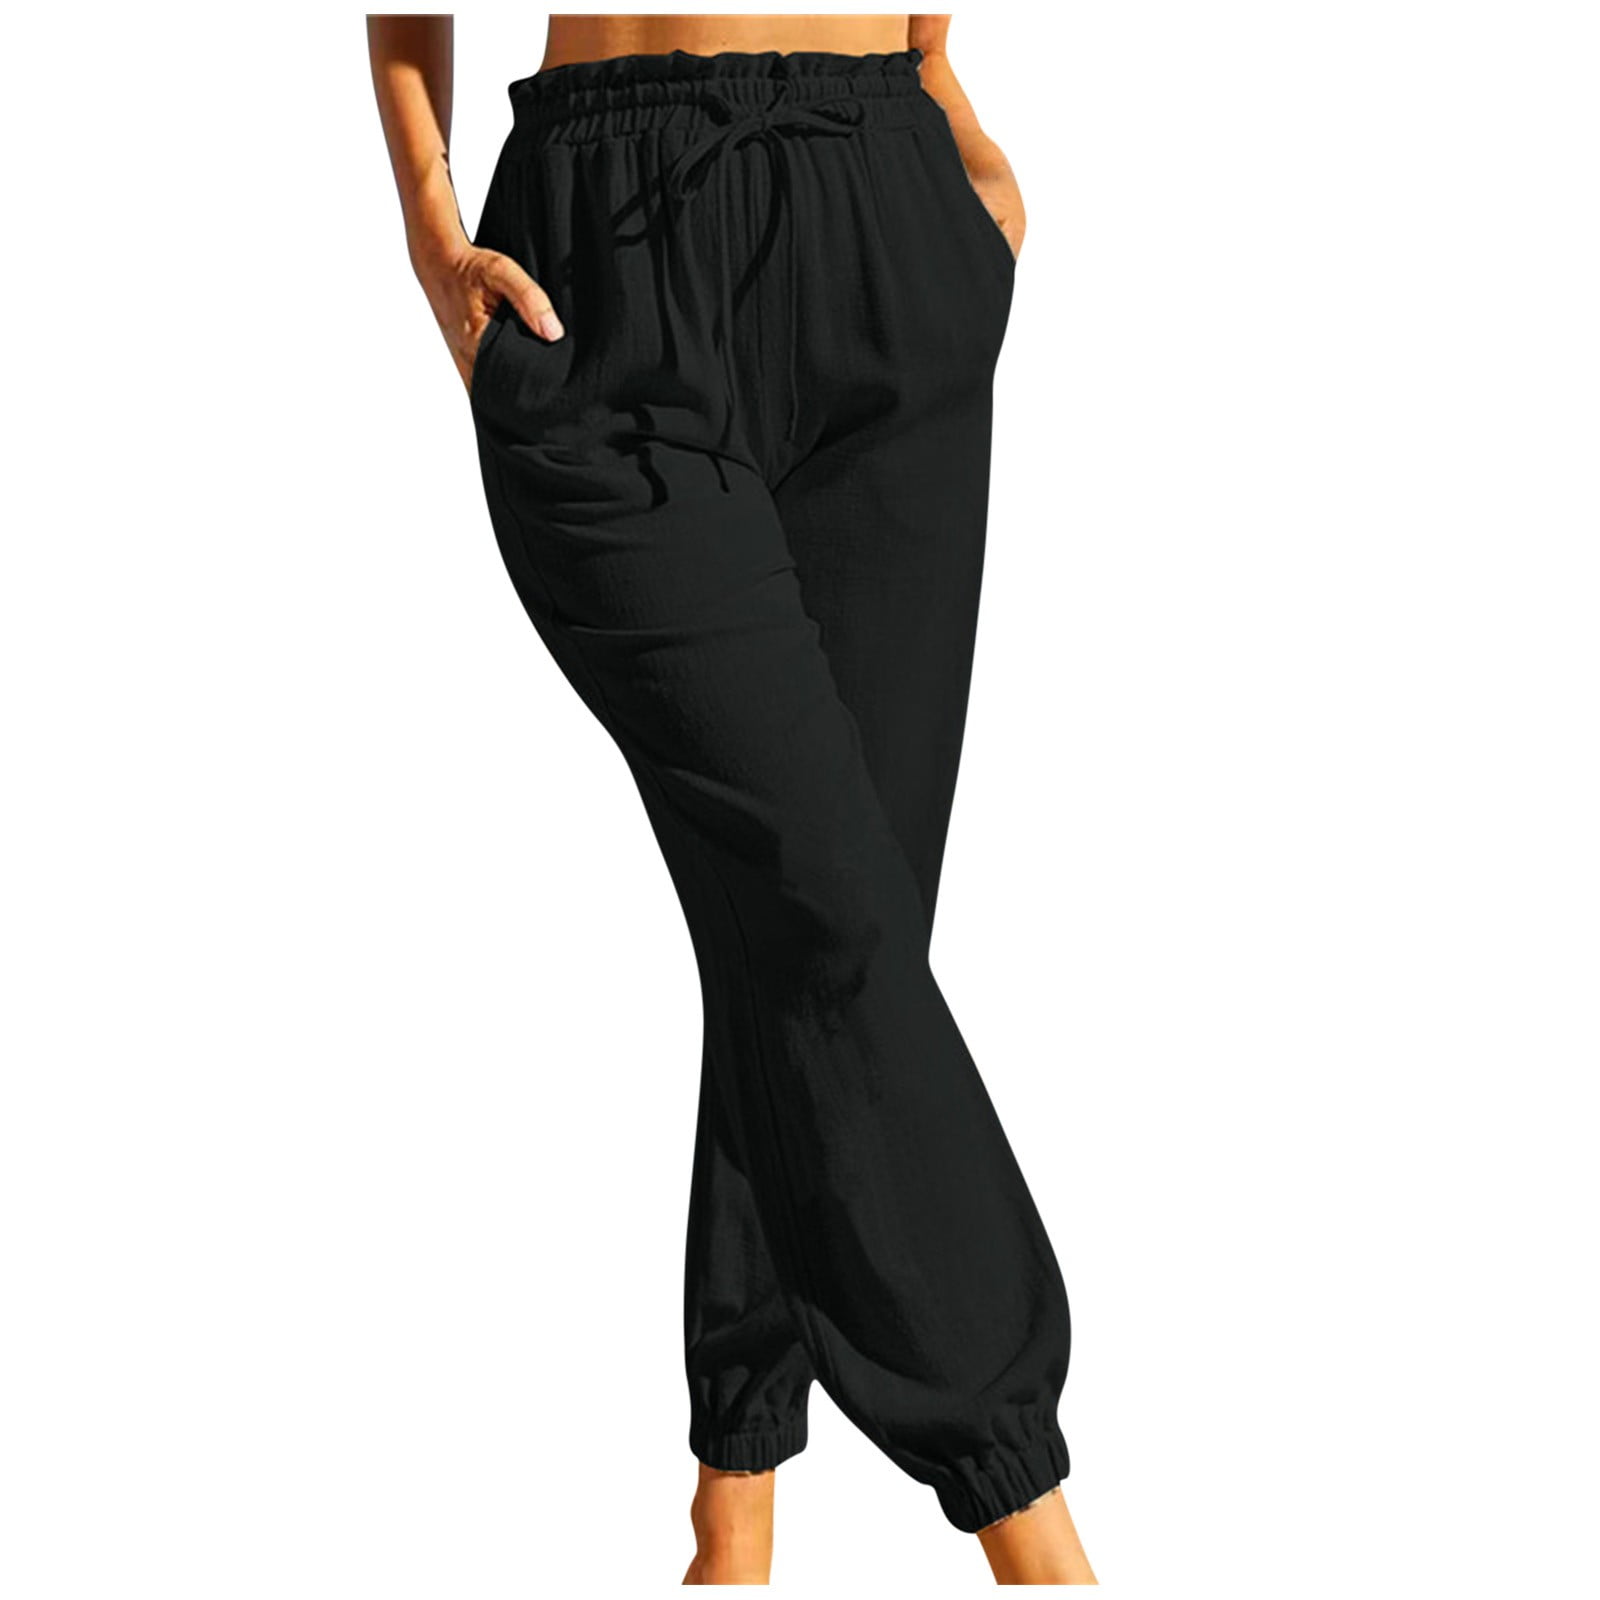 Airpow Clearance Jogger Pants Women's Fashion Casual Solid Color Elastic  Cotton And Linen Trousers Pants Black S 